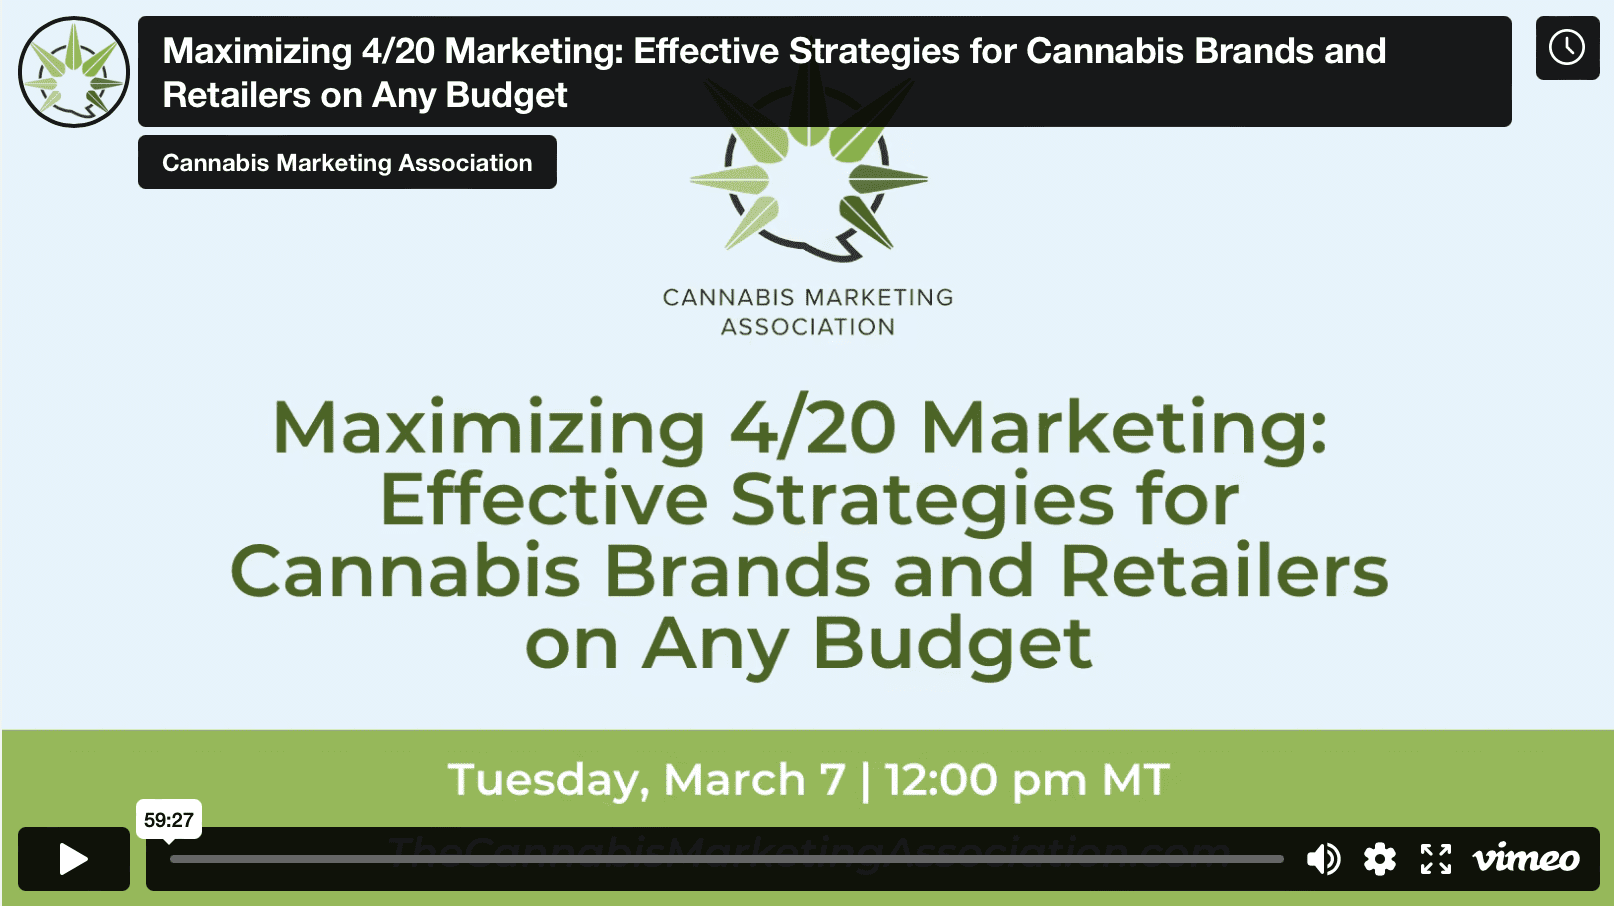 Maximizing 4/20 Marketing: Effective Strategies for Cannabis Brands and Retailers on Any Budget